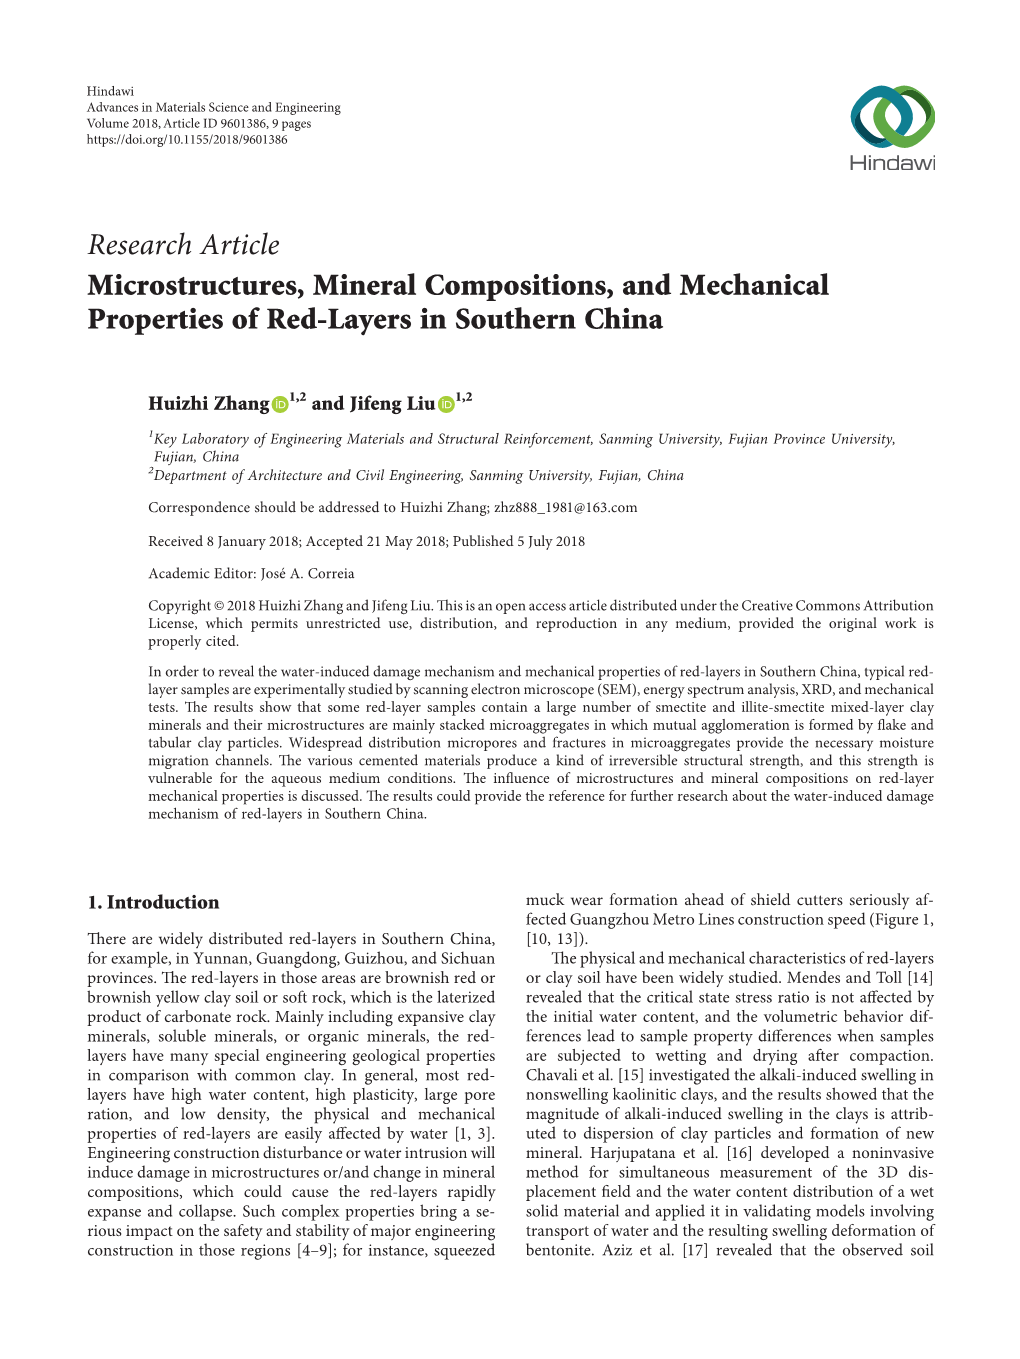 Microstructures, Mineral Compositions, and Mechanical Properties of Red-Layers in Southern China